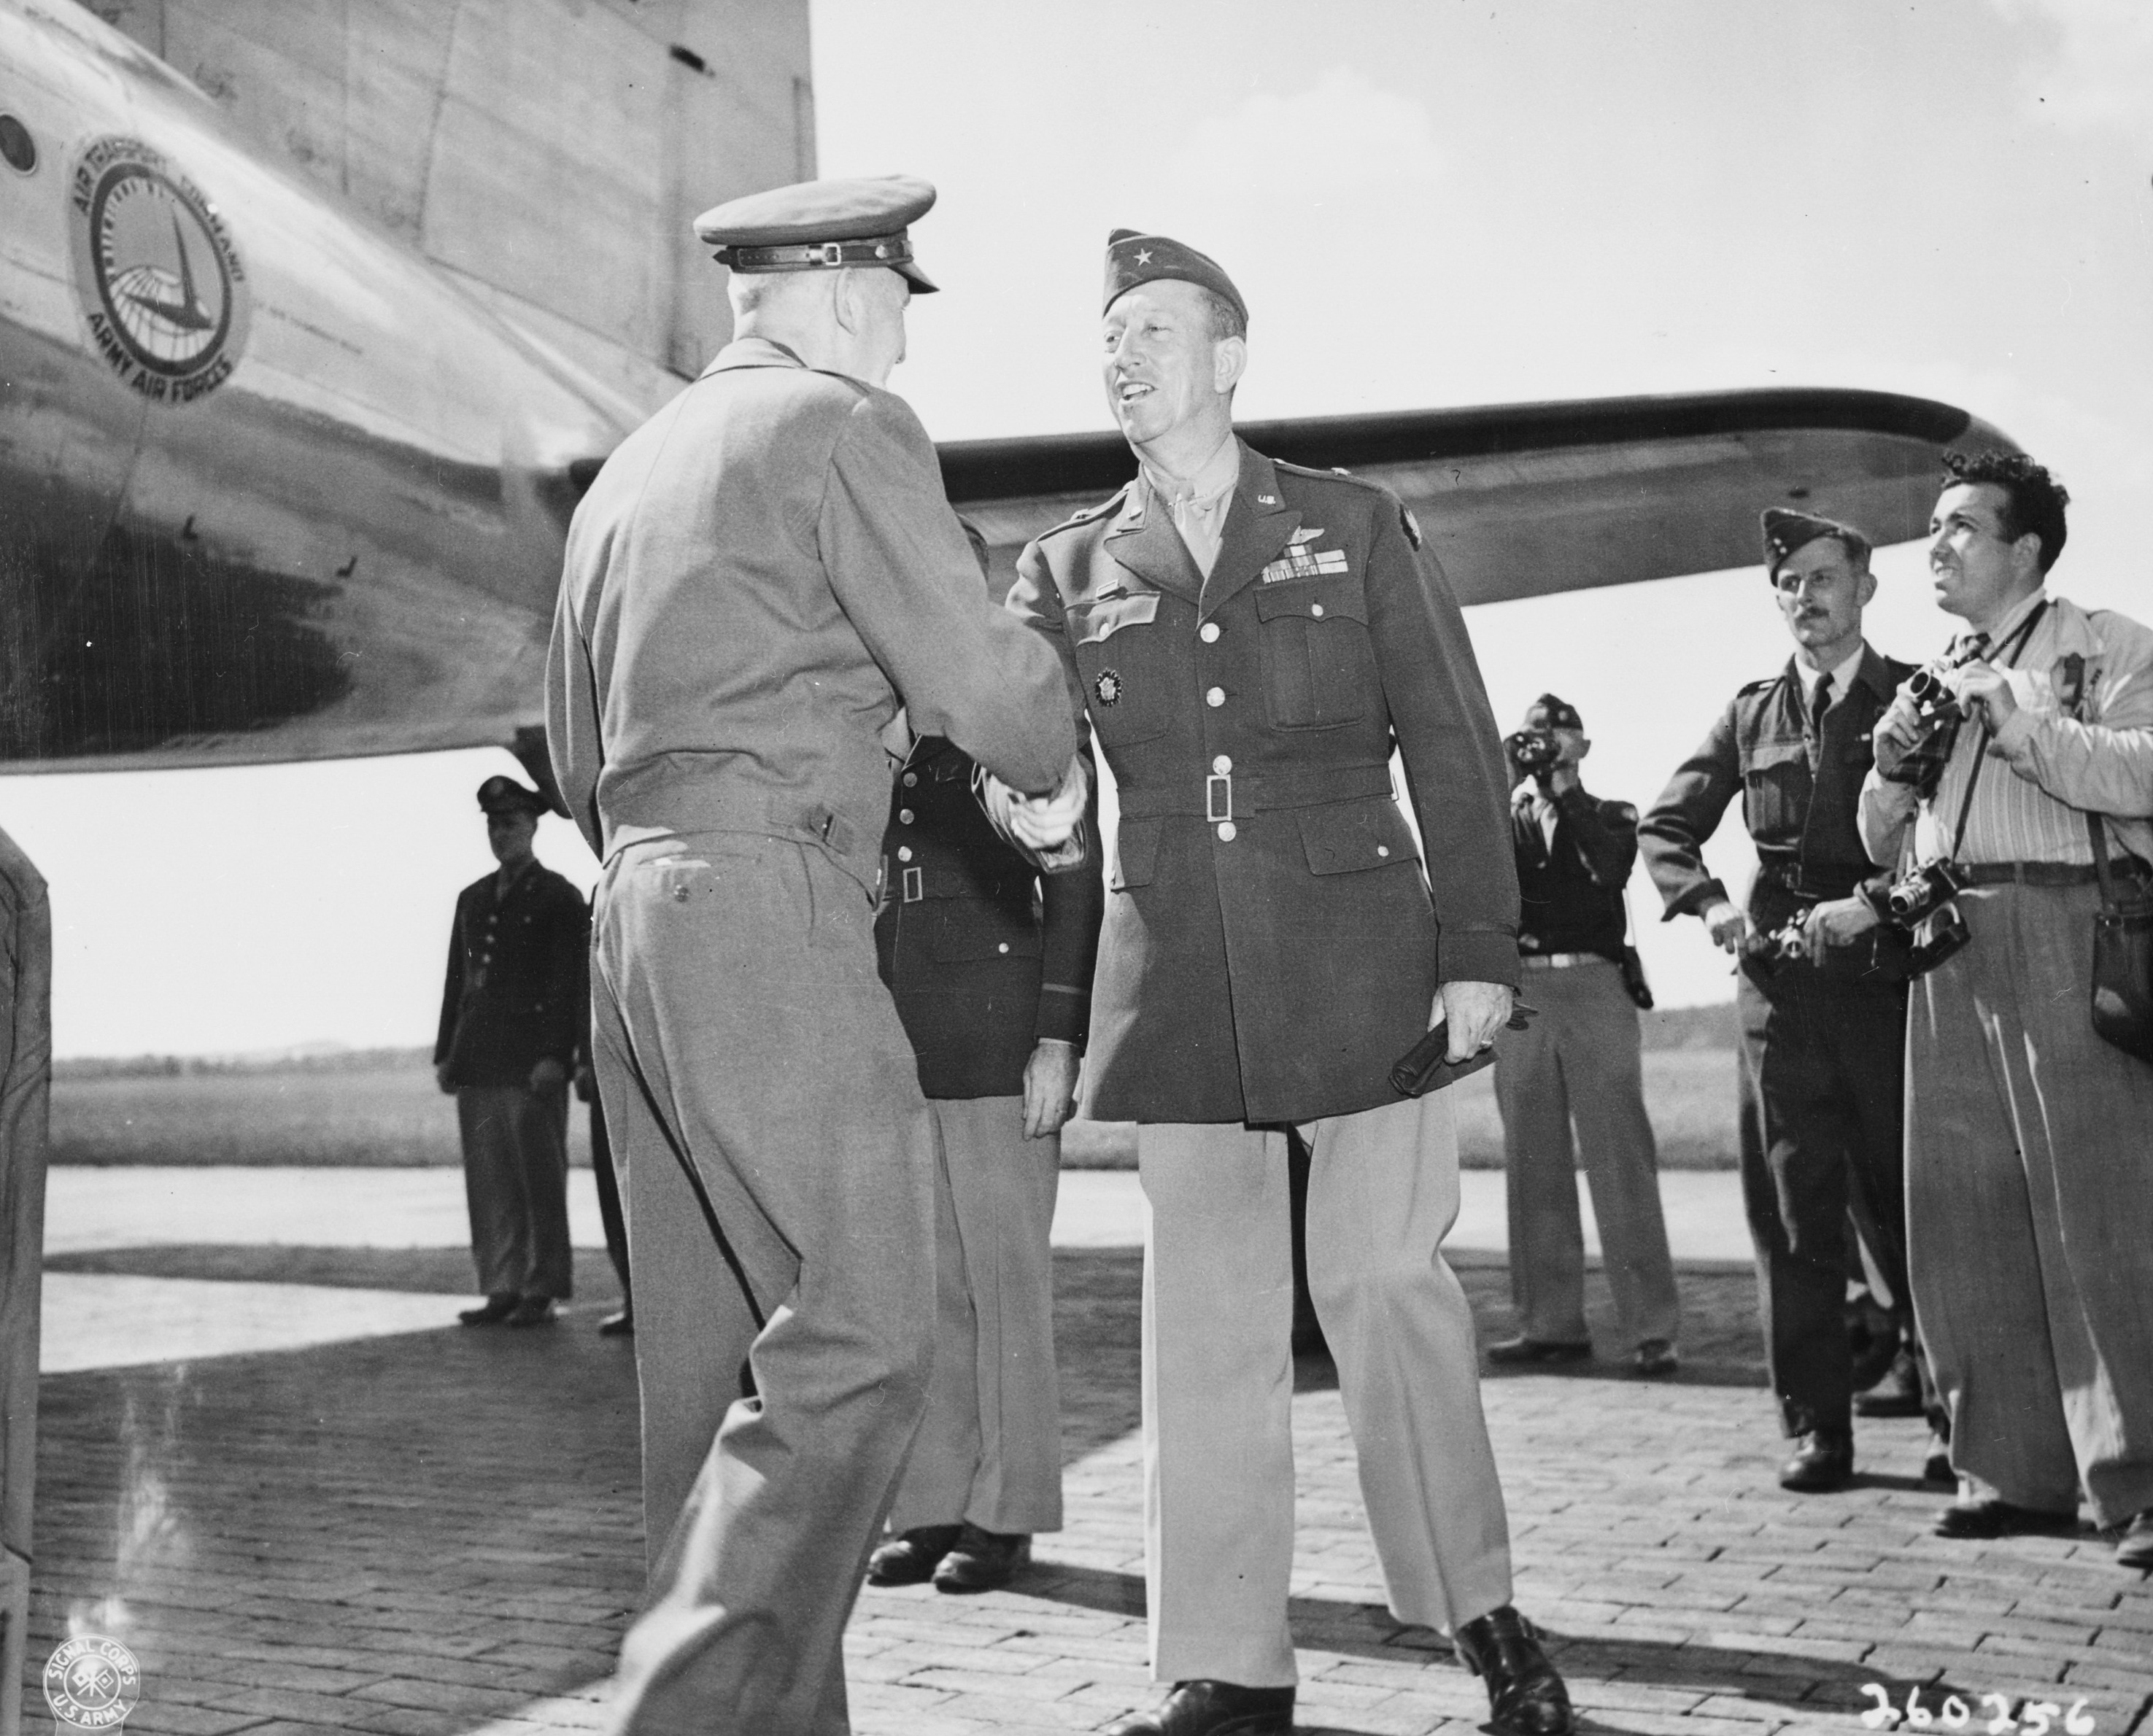 US General Brehon Somervall arriving at Berlin-Gatow airfield, Germany, 15 Jul 1945, photo 1 of 3; note Brigadier General Earl Hoag present to greet Somervall